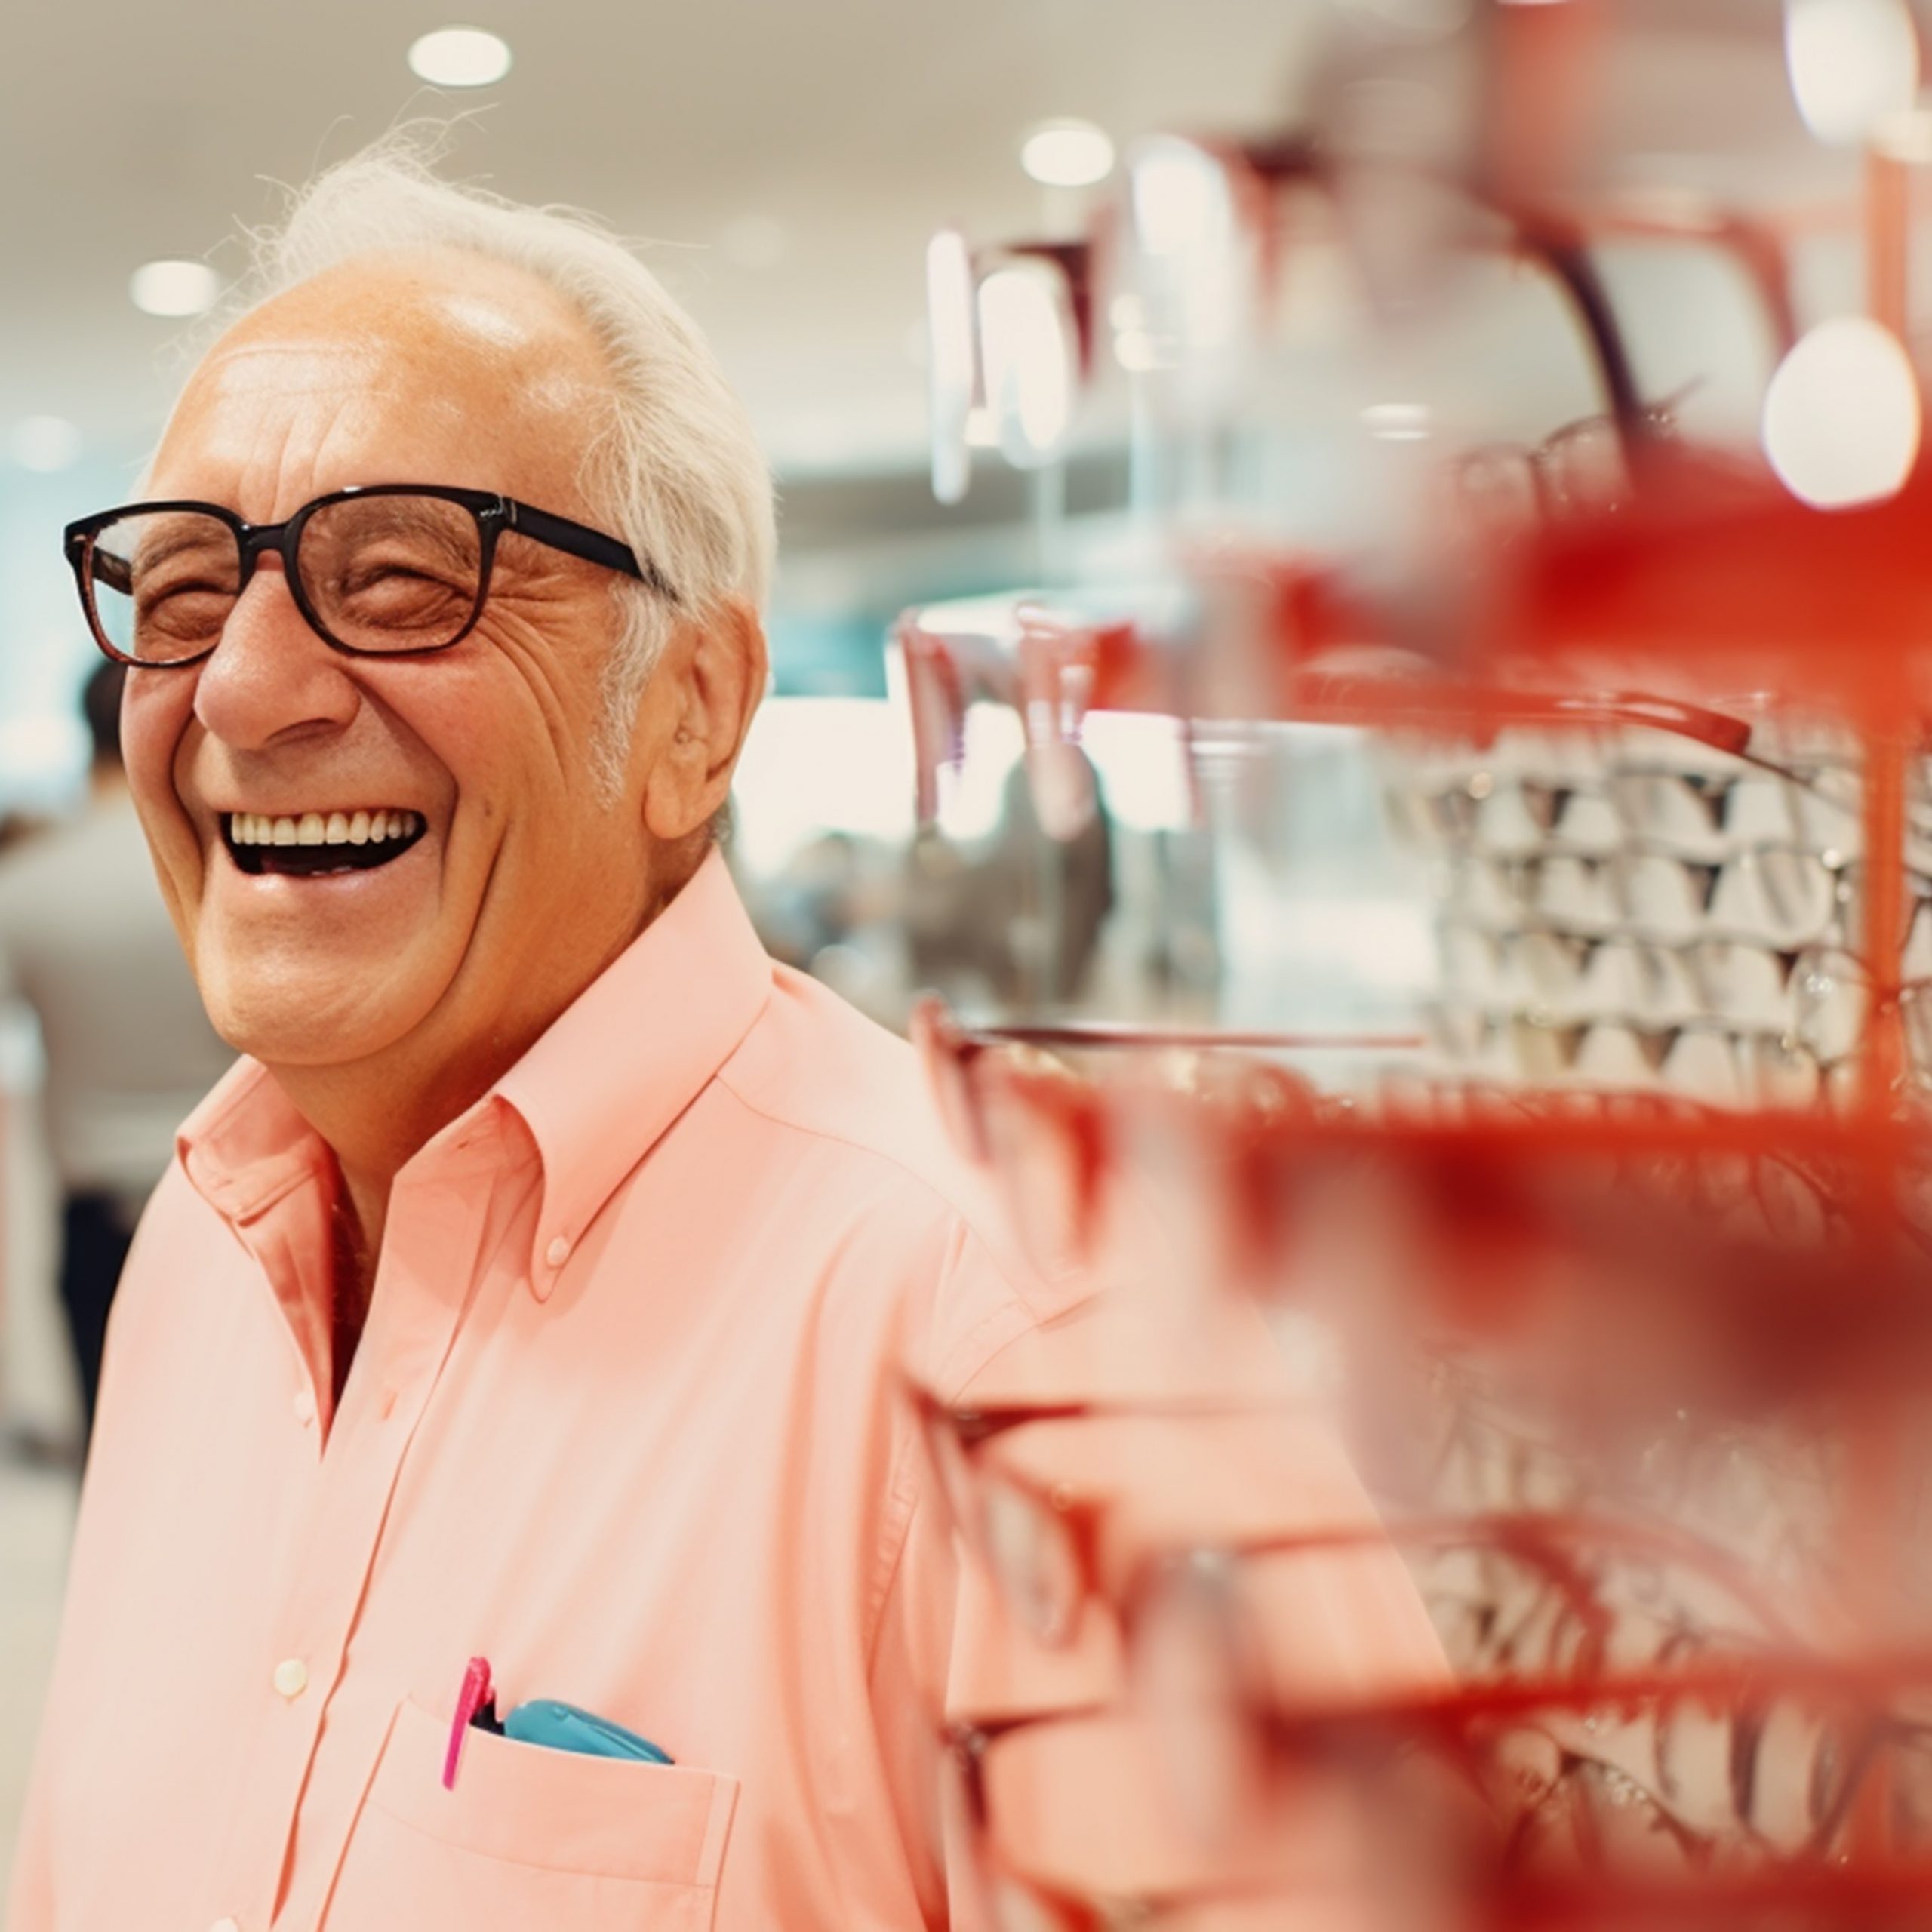 Man buying a new pair of glasses at an optometrist store.